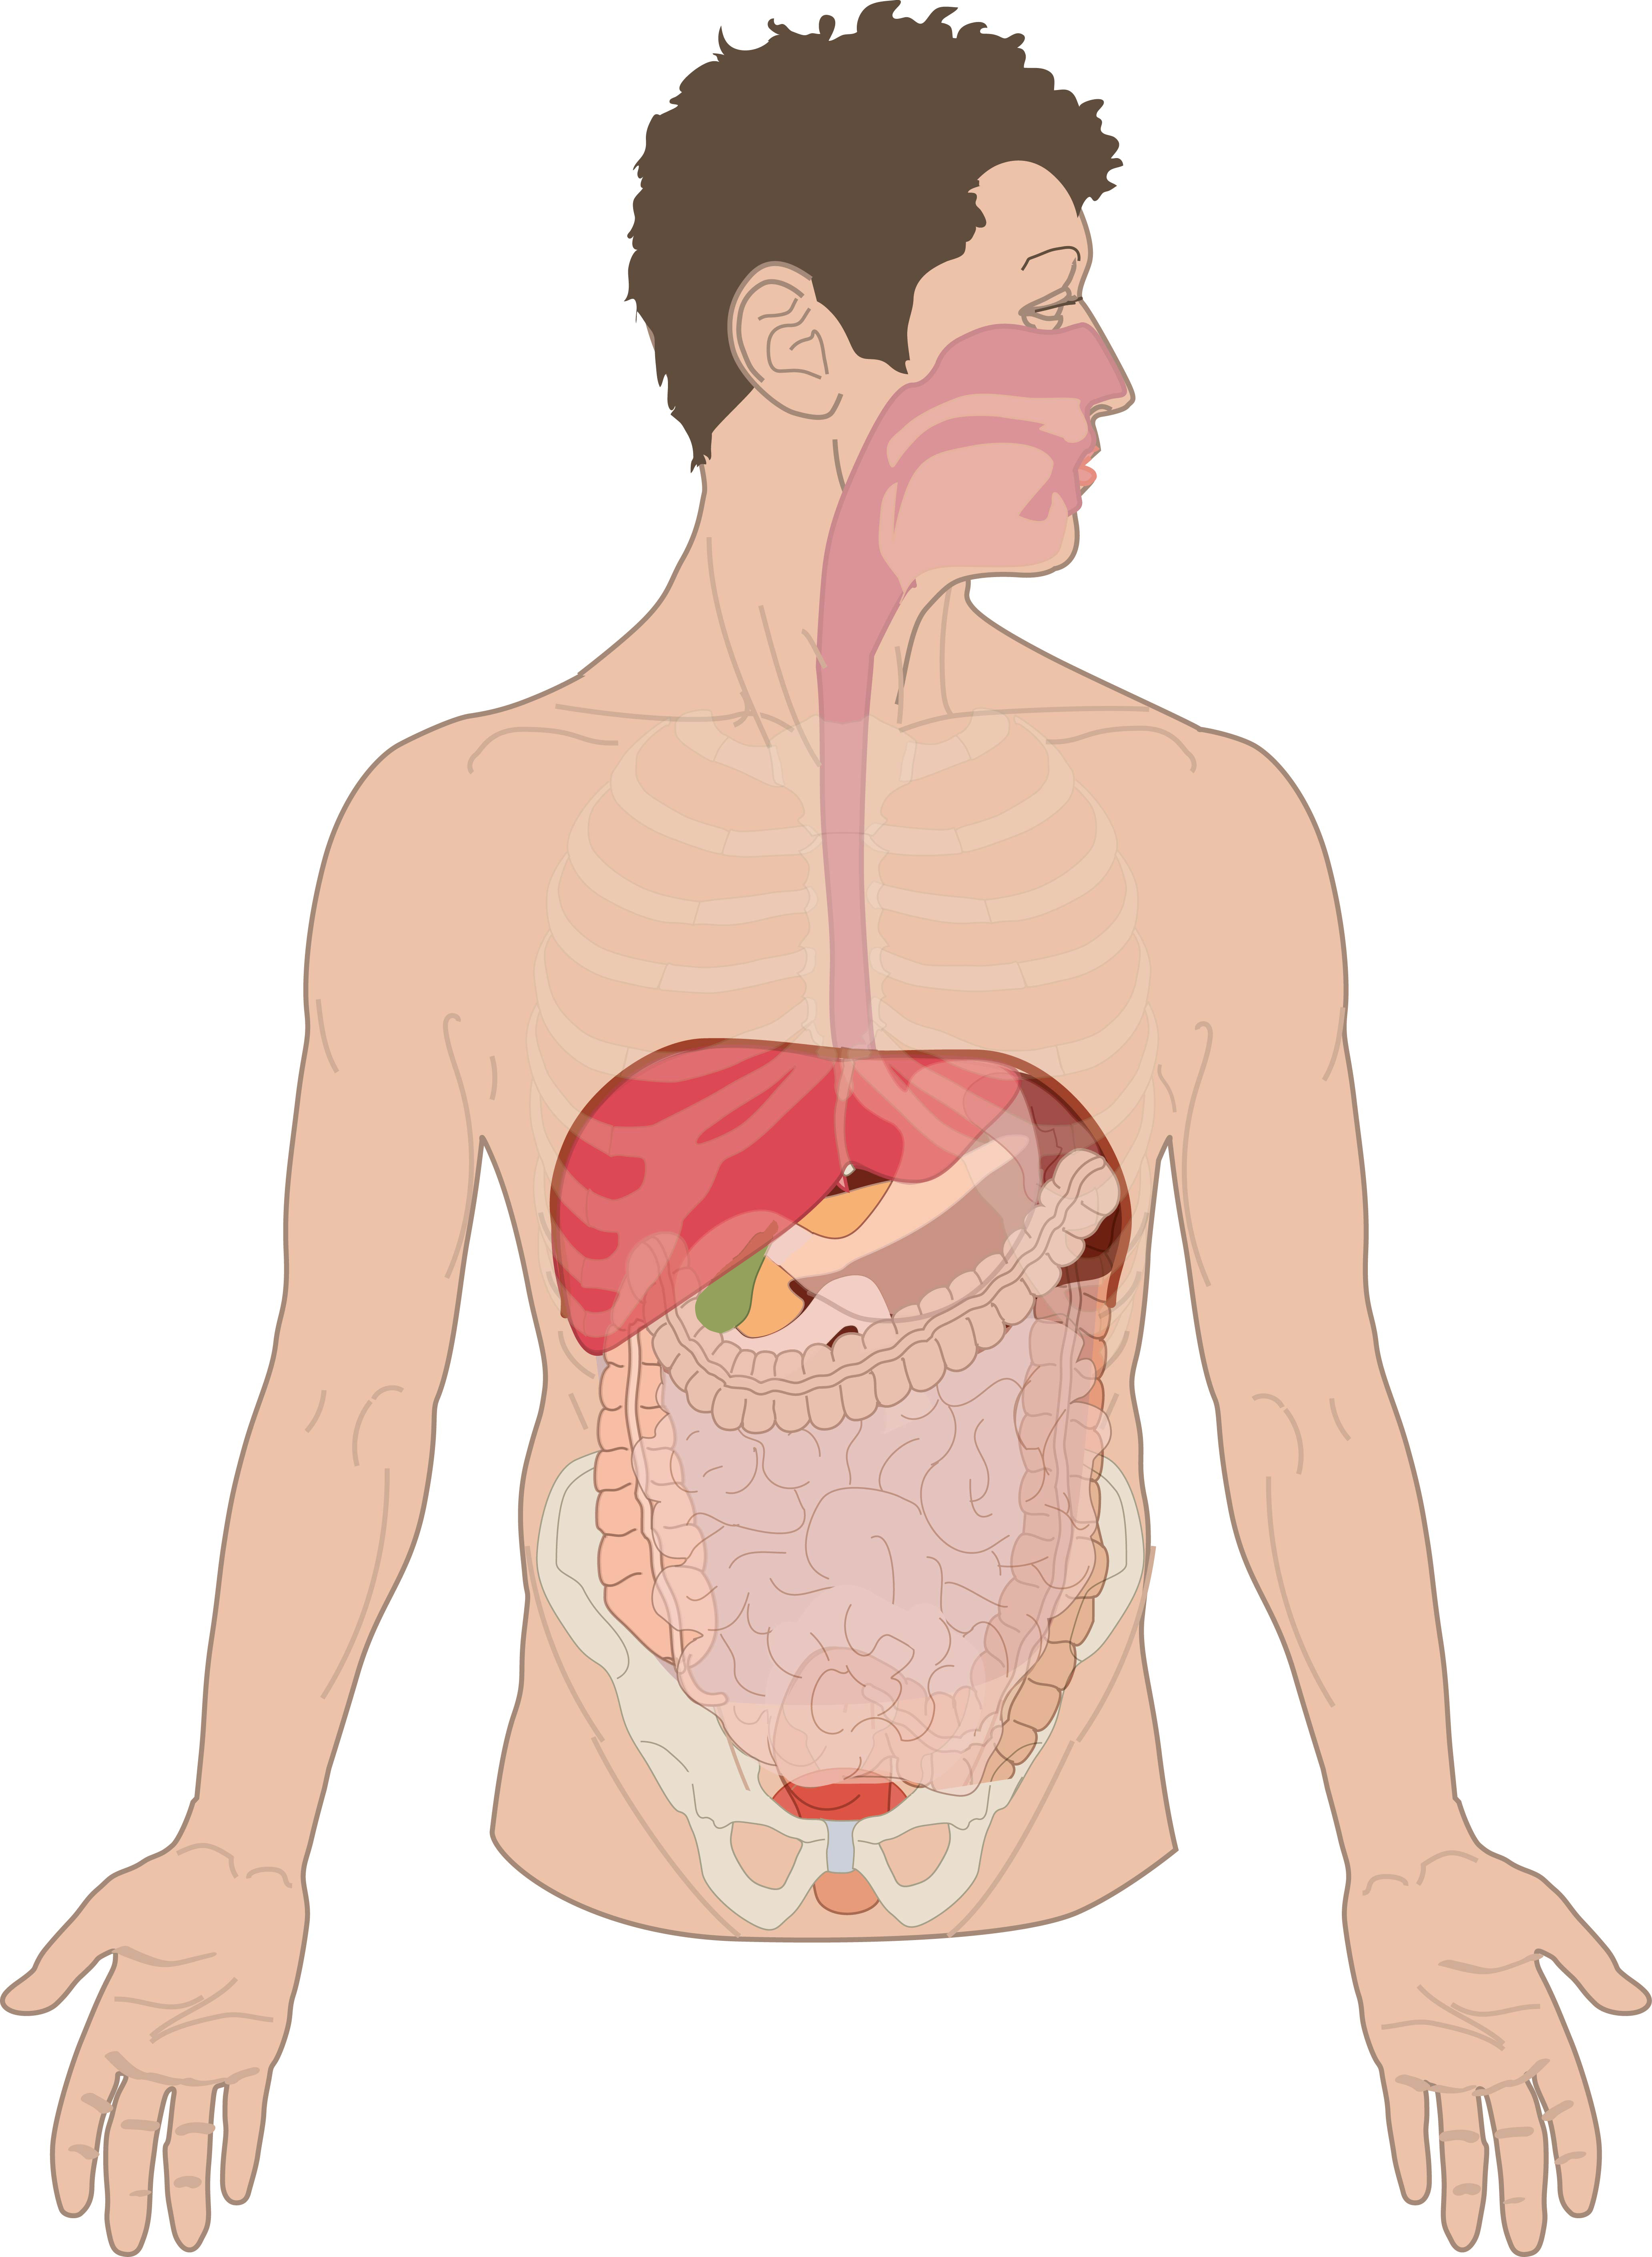 Surface Projection Of Digestive Tract On Thoracic Cage Transparent Organs Anatomytool